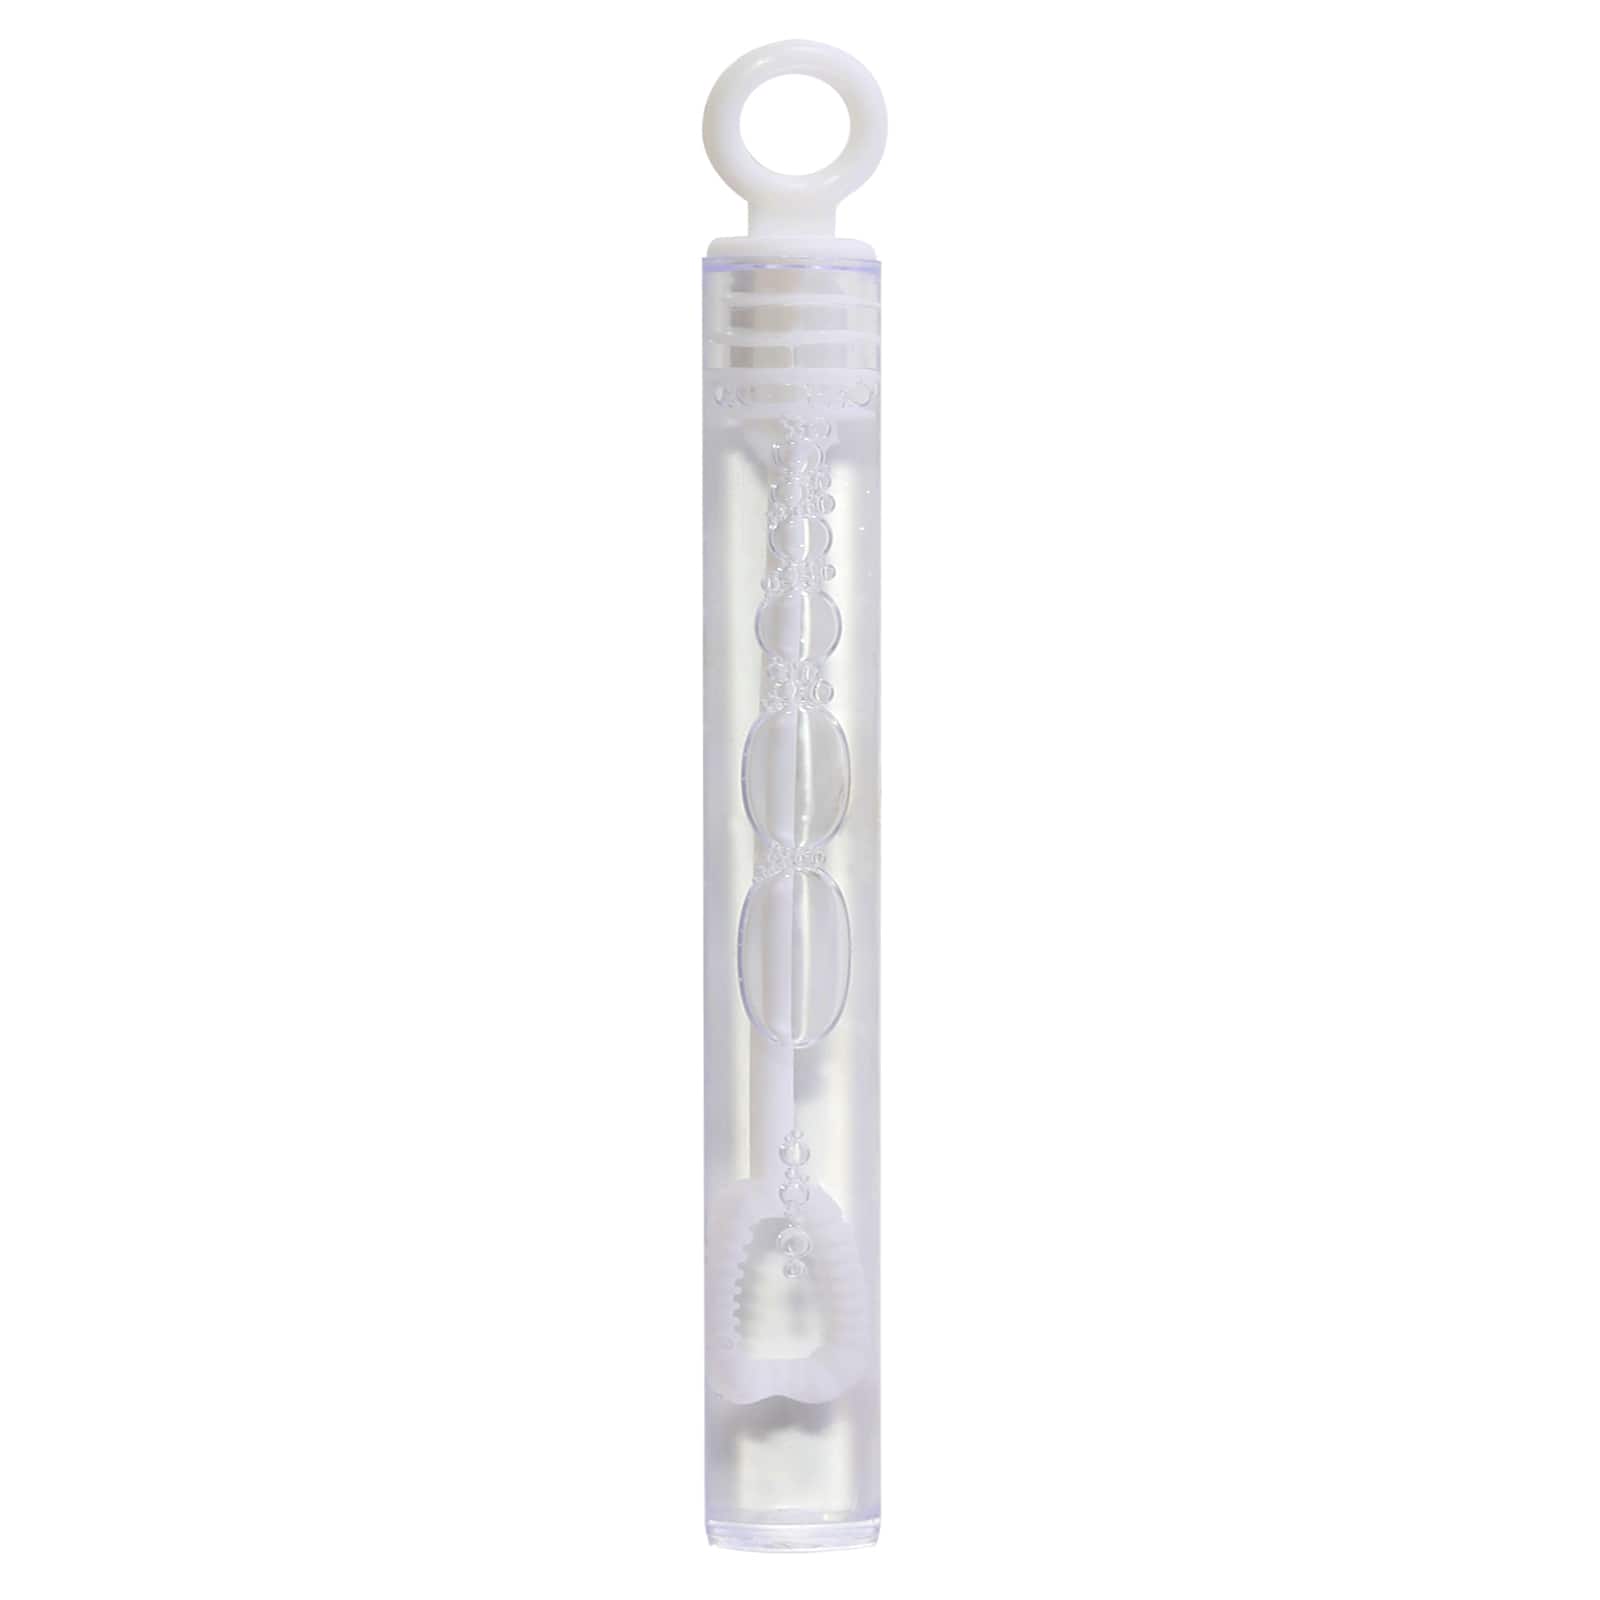 6 Packs: 100 ct. (600 total) Bubble Wands by Celebrate It&#x2122; Wedding